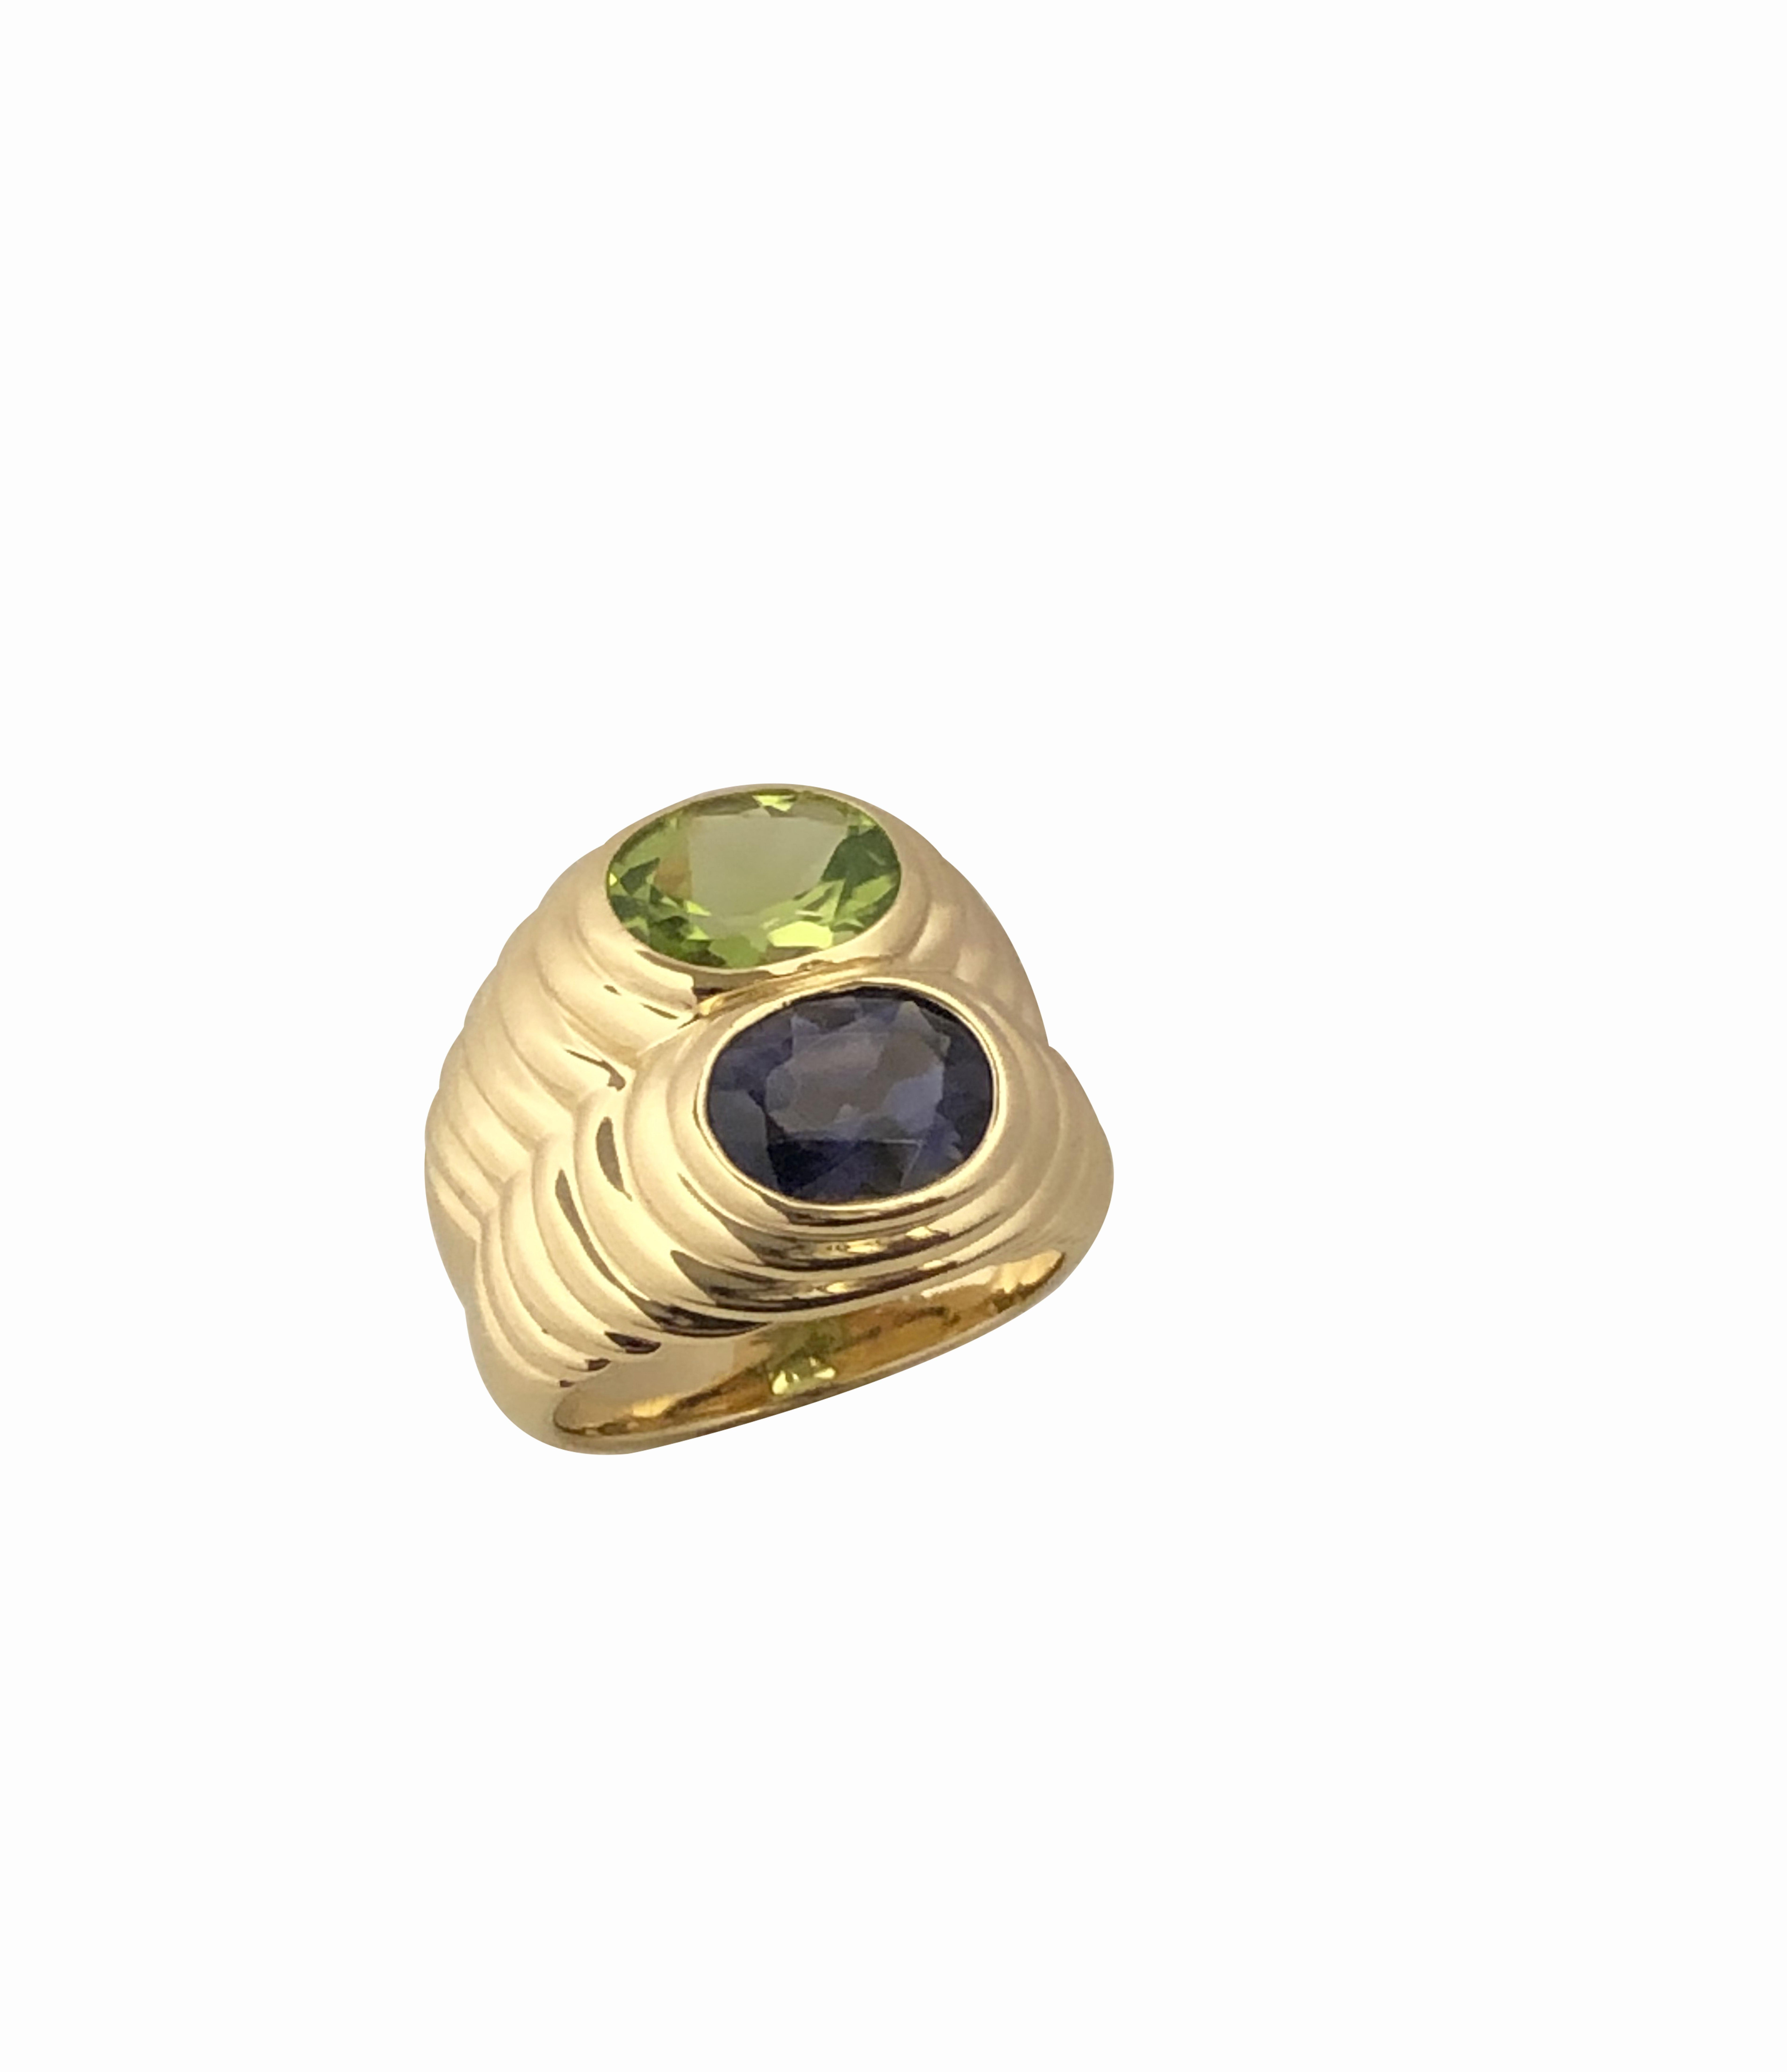 Circa 1990 Bulgari Doppio 18k Yellow Gold ring, set with a Fine Blue Oval Iolite and Intense color Oval Peridot each being approximately 1.50 Carats, the top of the ring measures 3/4 X 3/4 inch, scalloped sides with a nice solid construction and a